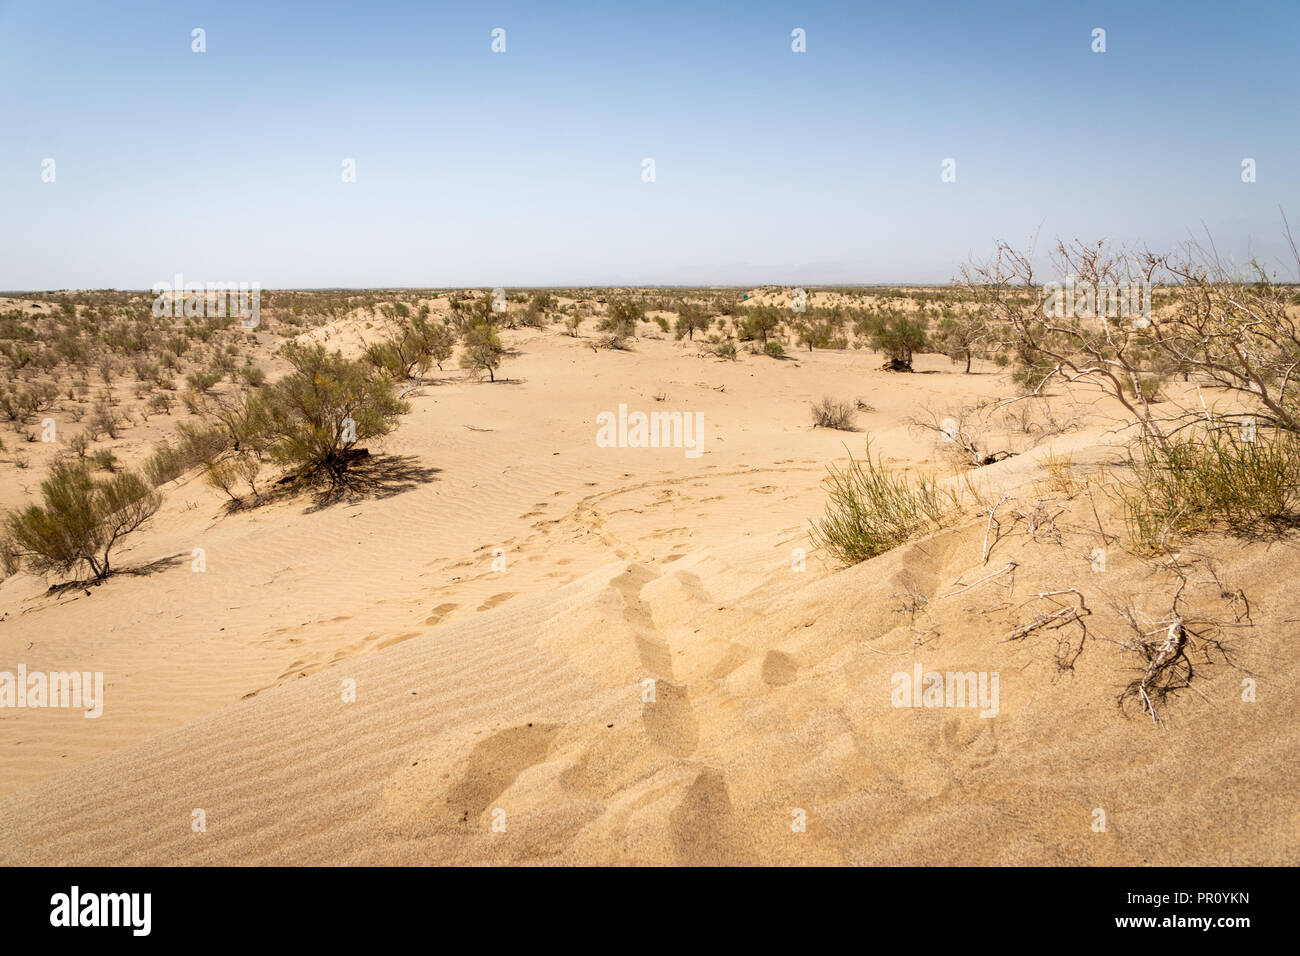 footsteps in the sand dunes in desert landscape in the middle east Stock Photo